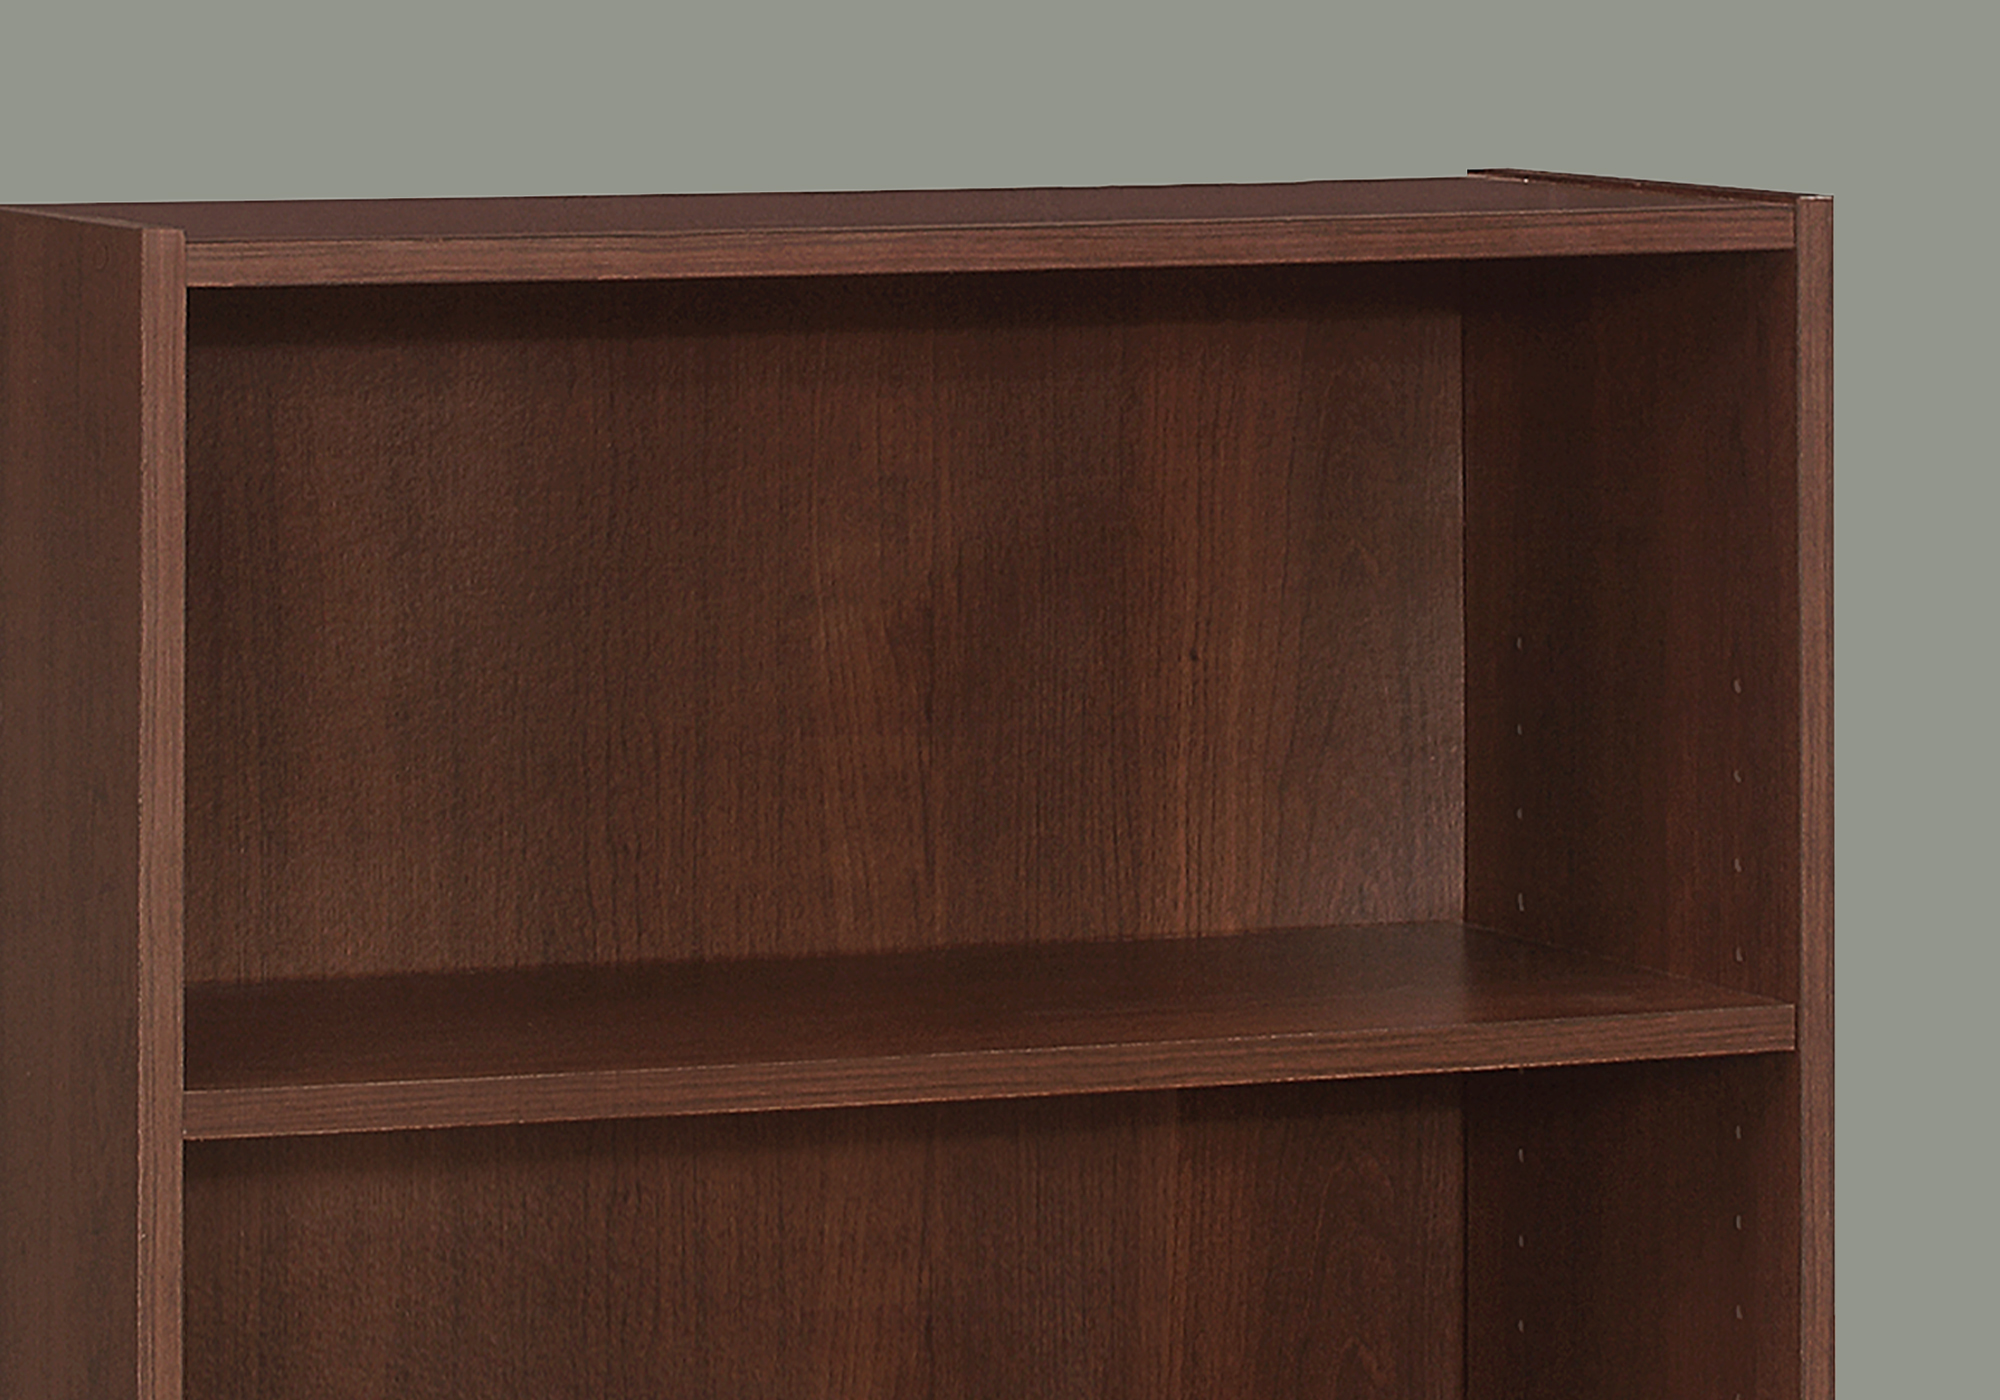 BOOKCASE - 36"H / CHERRY WITH 3 SHELVES